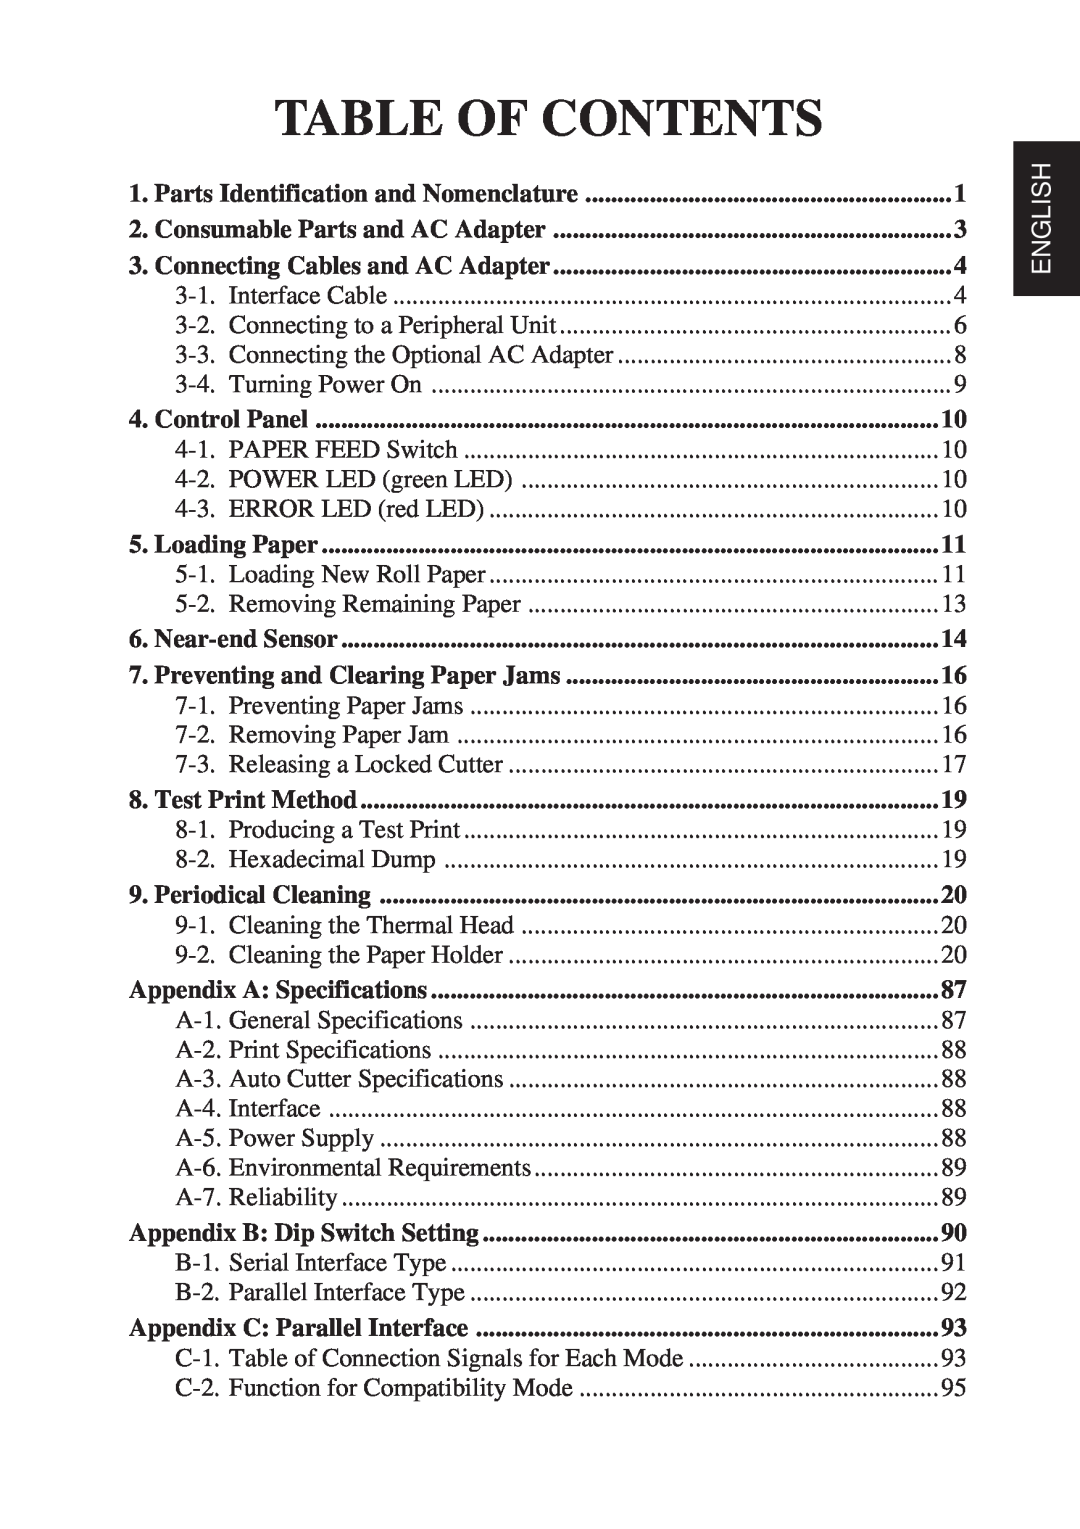 Star Micronics TSP2000 user manual Table Of Contents, English 